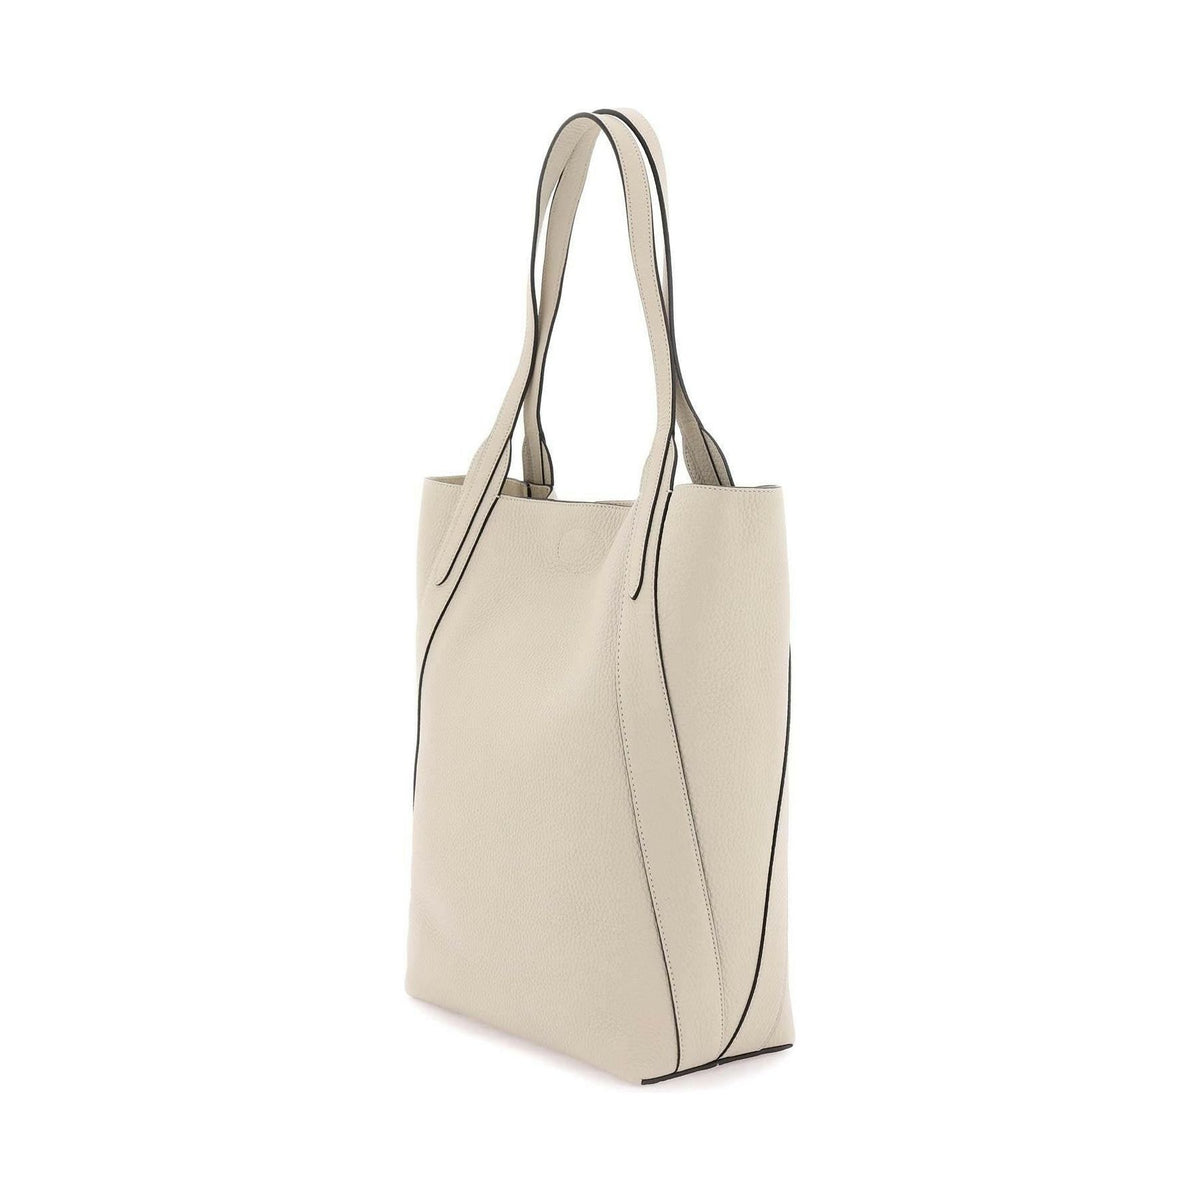 Grained Leather Bayswater Tote Bag MULBERRY JOHN JULIA.